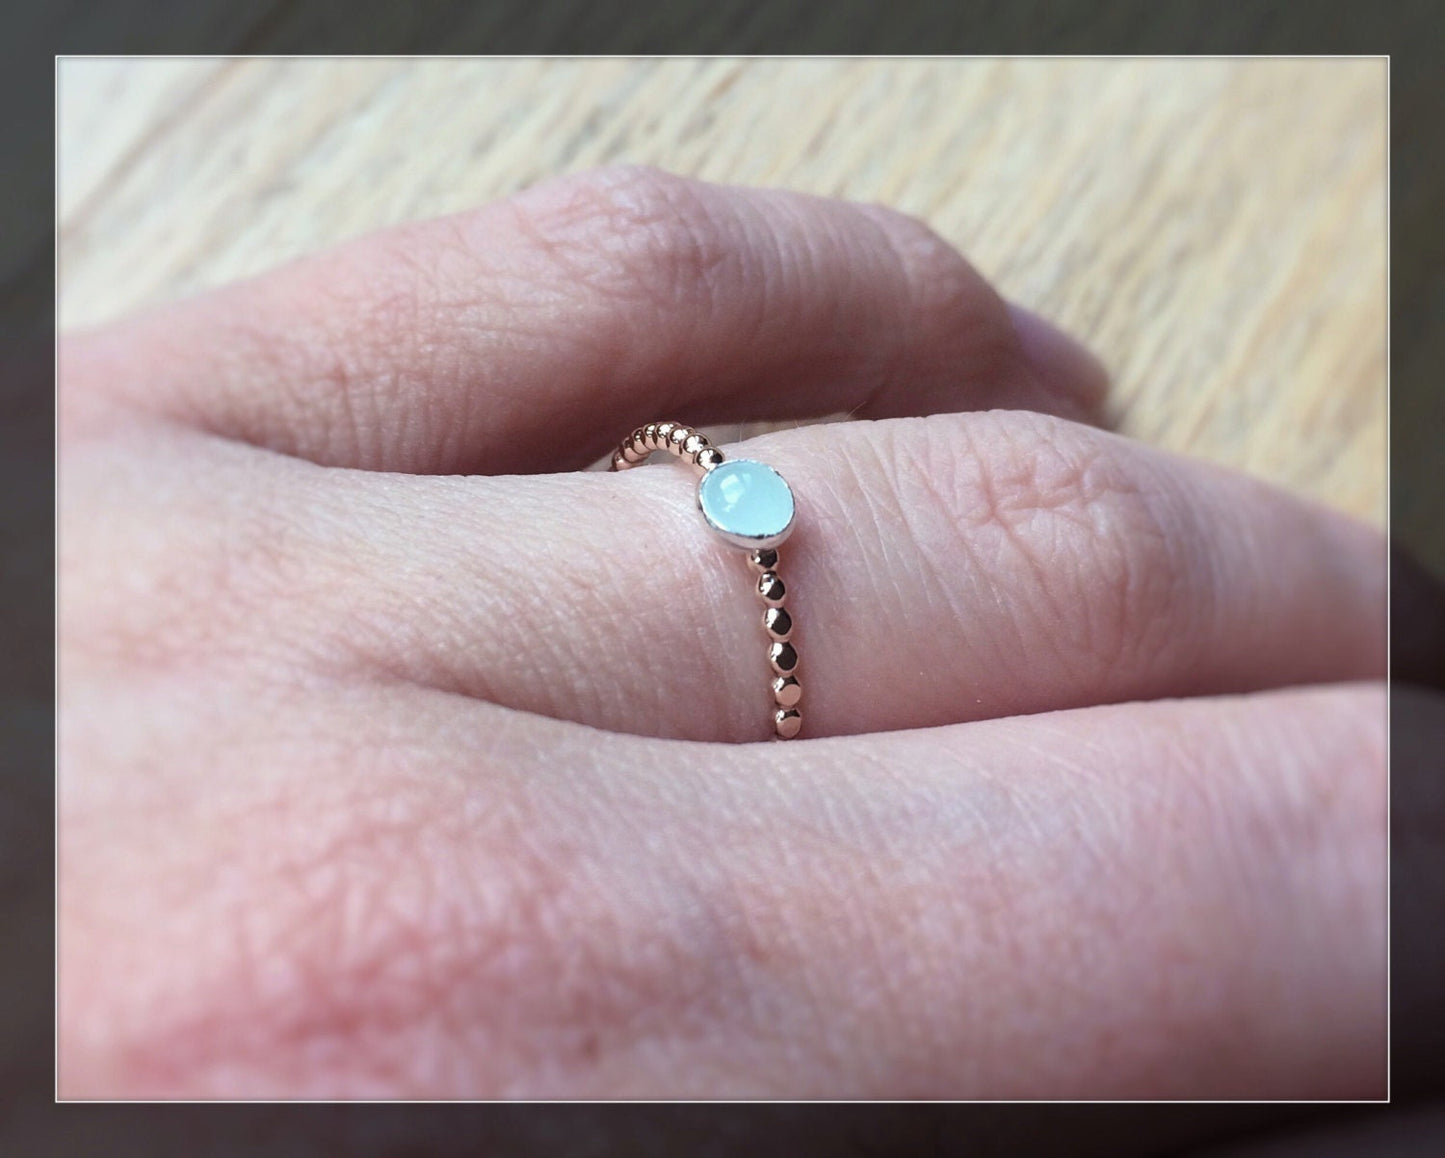 Gold Beaded Aquamarine Ring, Mixed Metal Stacking Ring, Unique Design, Beaded Ring, Gold and Silver Ring, Gemstone, Pale Blue Aquamarine